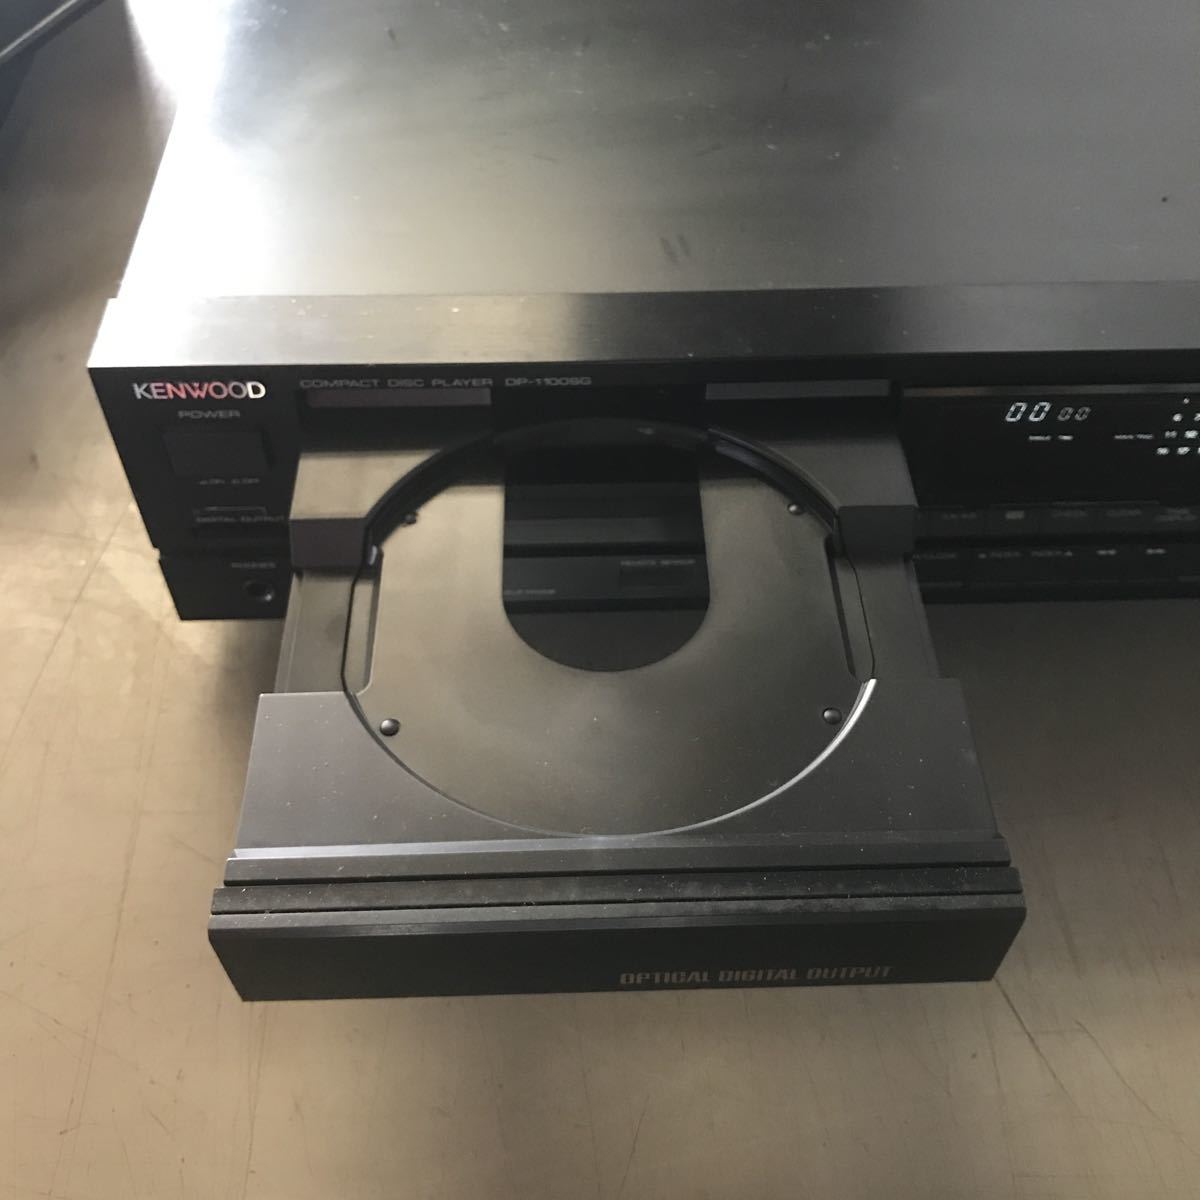 KENWOOD( Kenwood )DP-1100SG CD player electrification ending present condition exhibition 